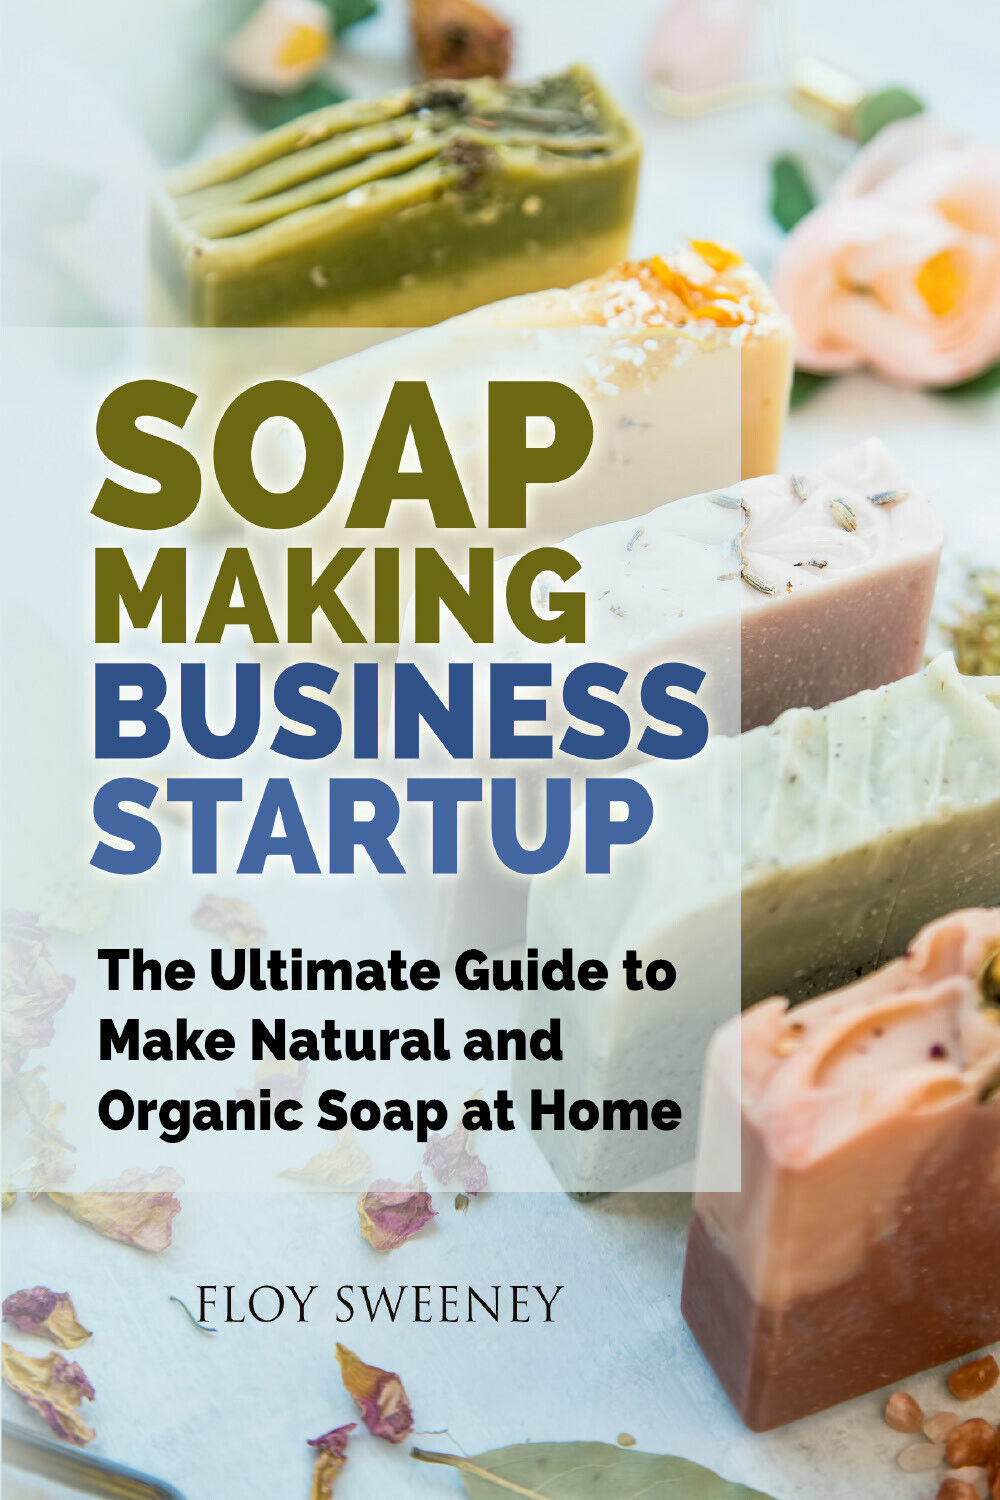 Soap Making Business Startup. The Ultimate Guide to Make Natural and Organic Soa